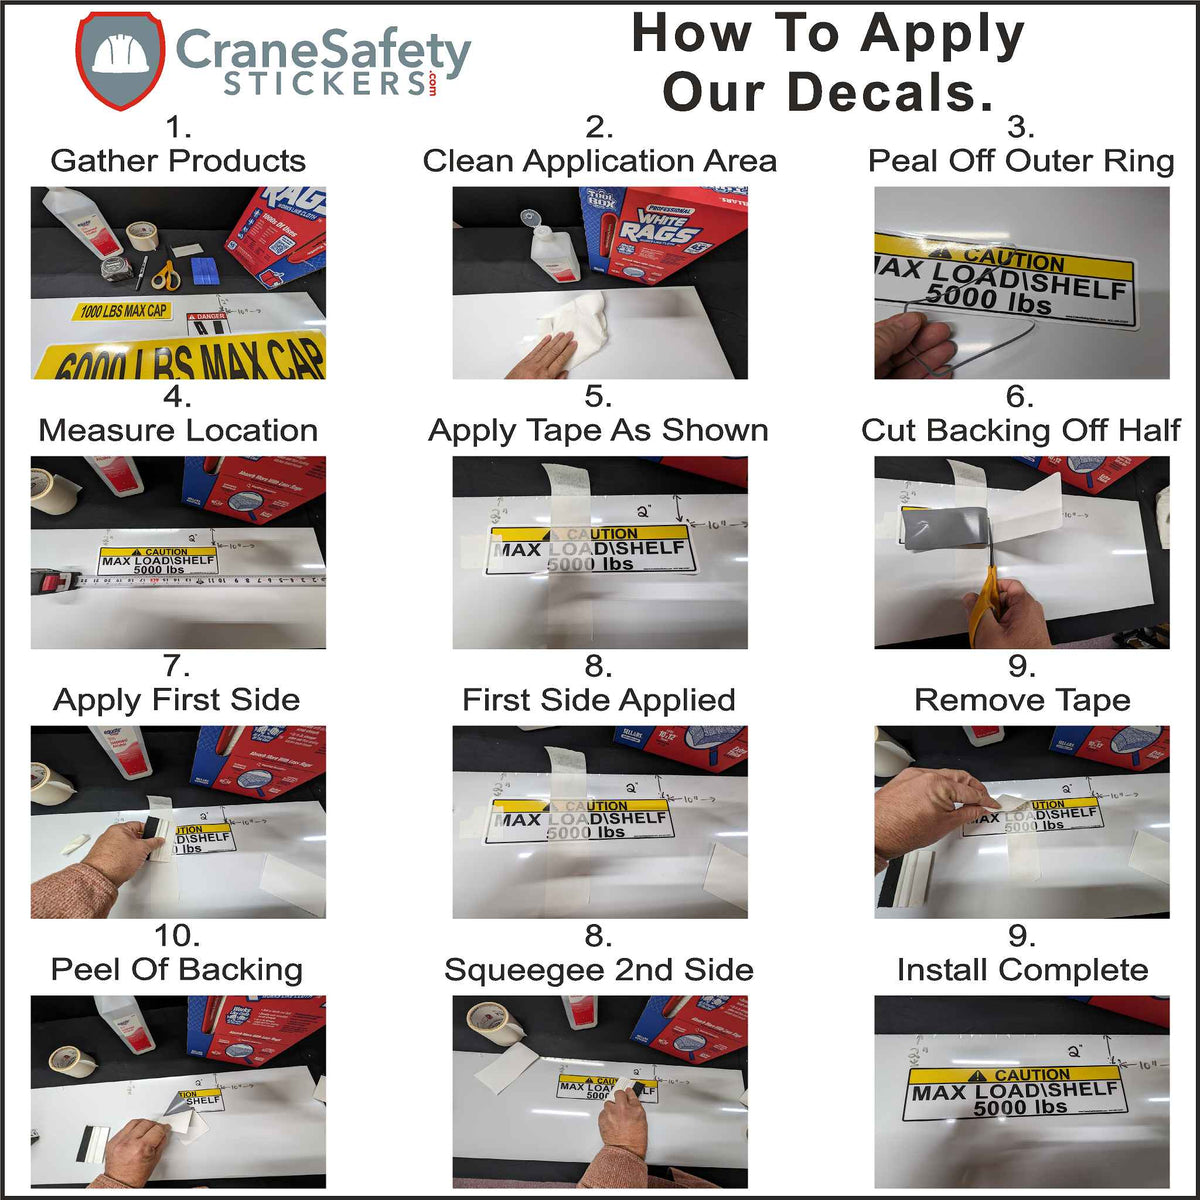 How to apply our Danger keep clear of swing radius of crane safety sign.